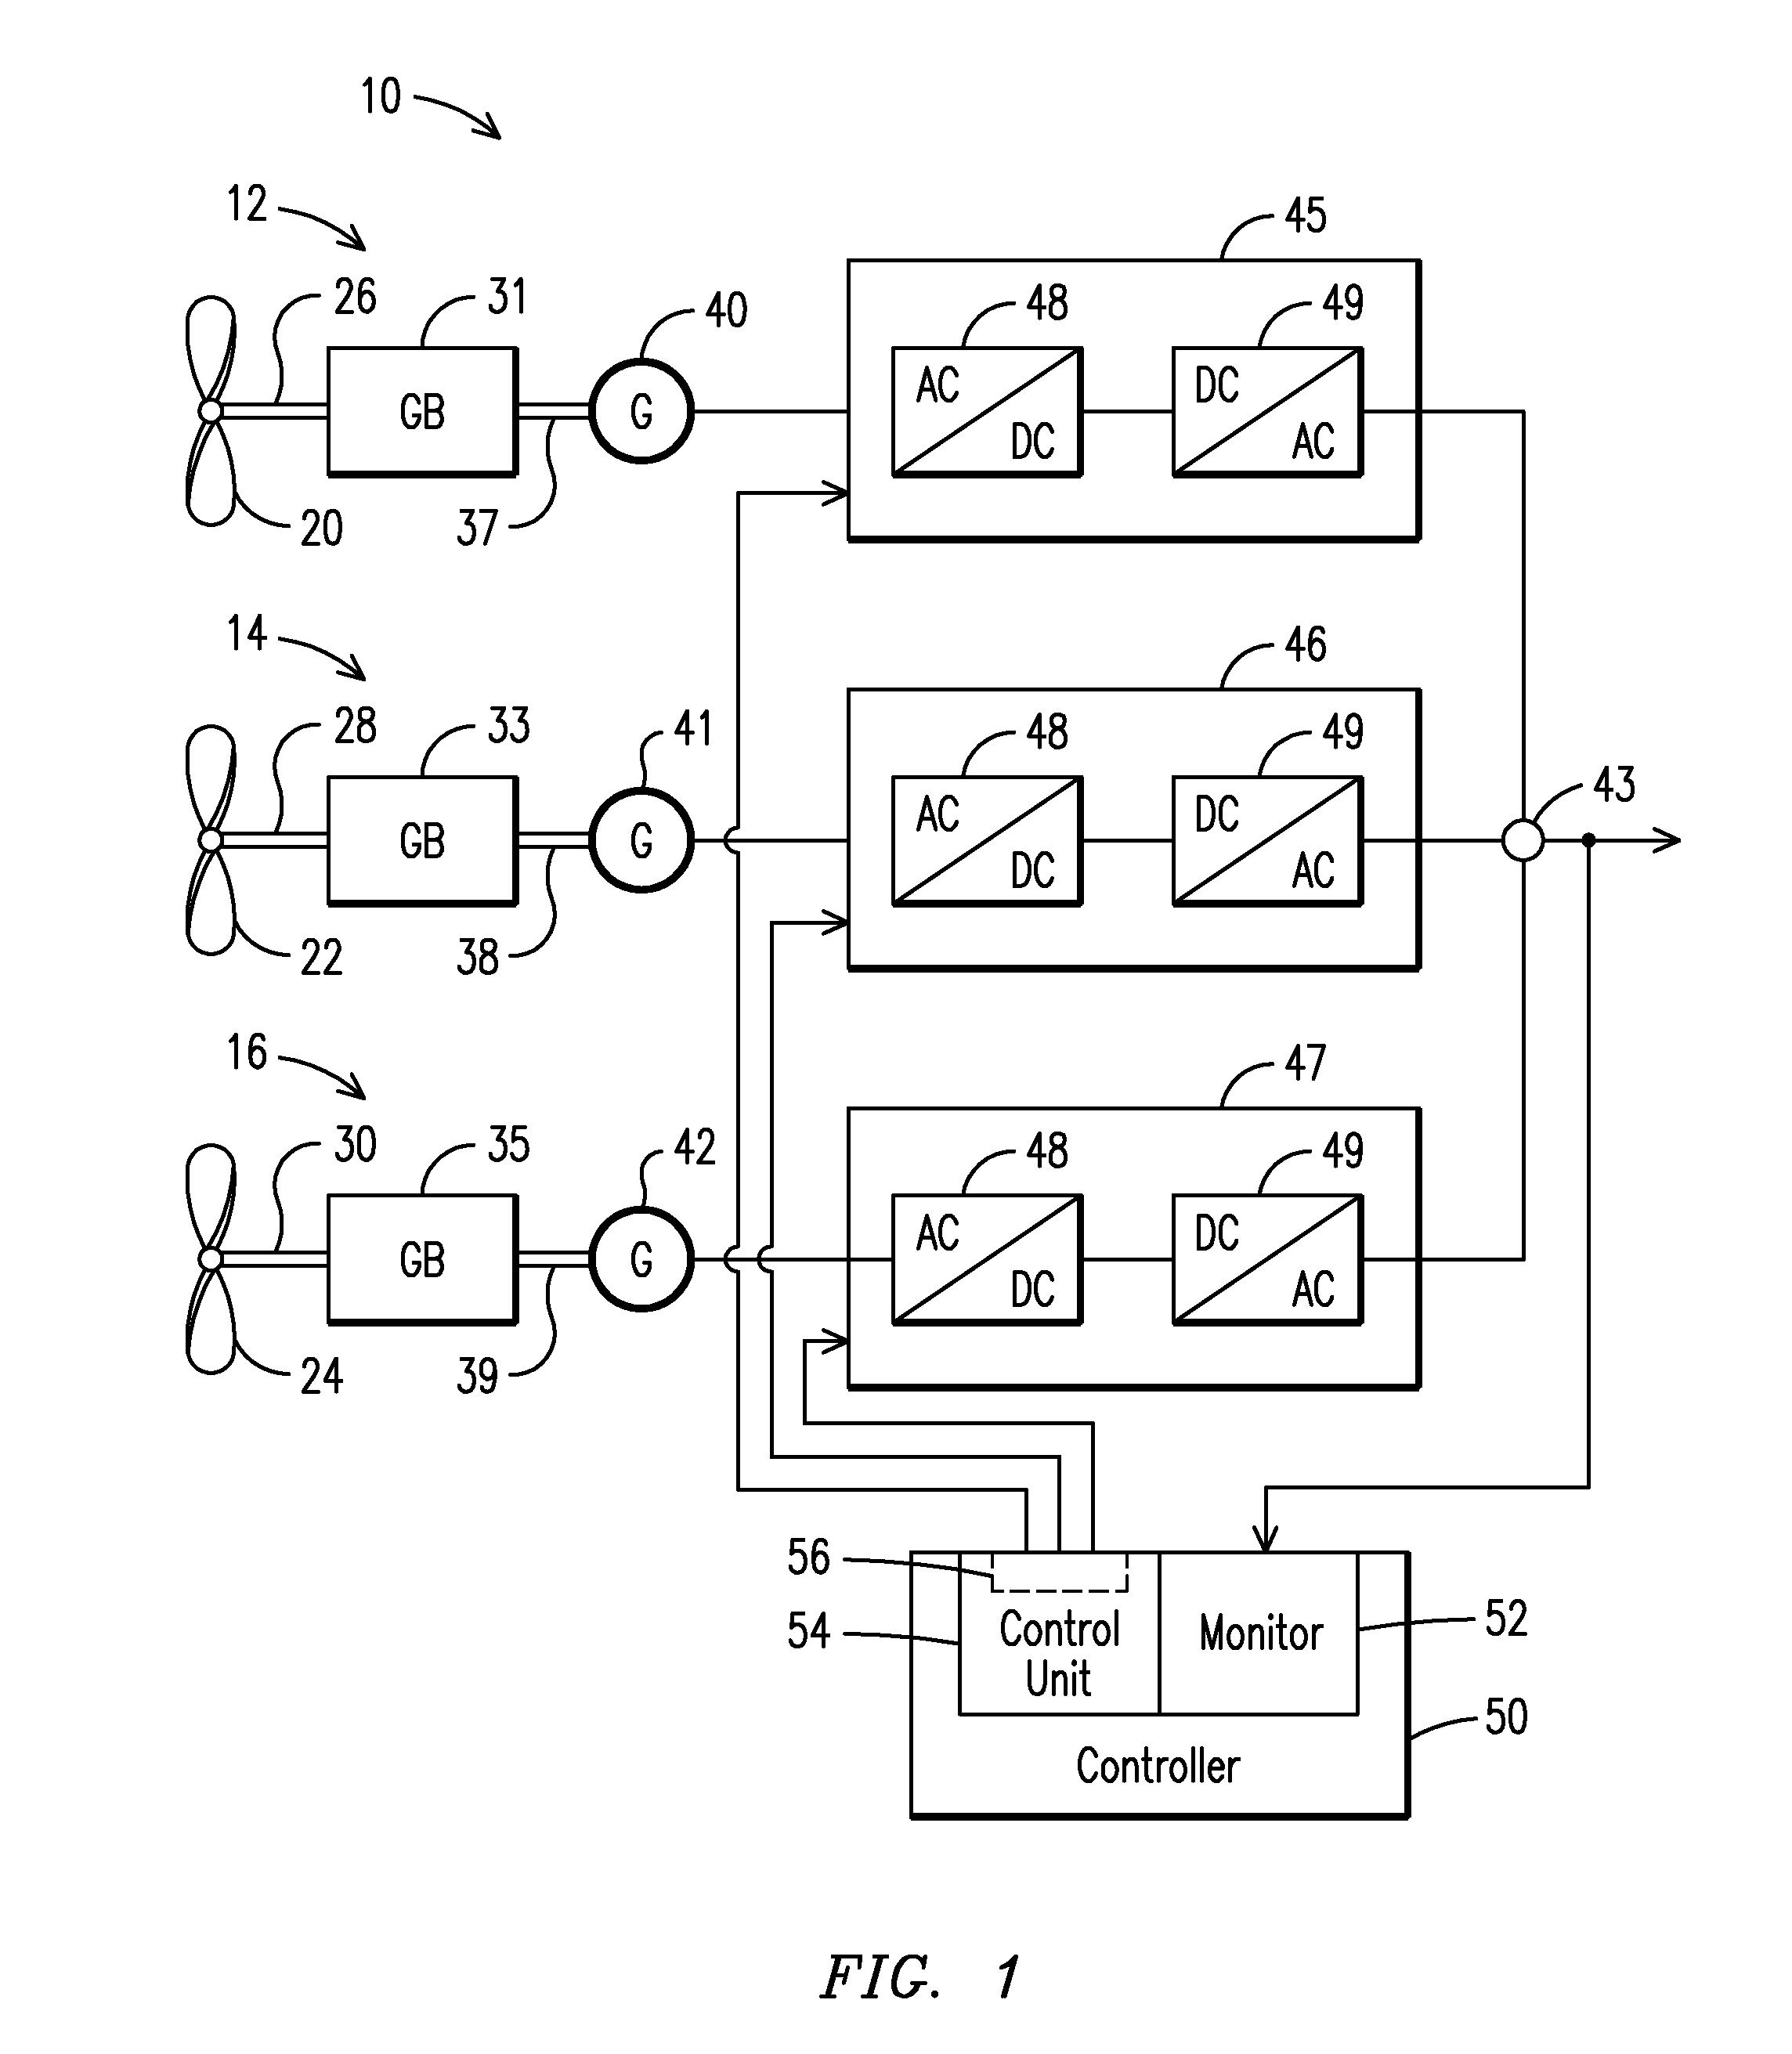 Bang-Bang Controller and Control Method For Variable Speed Wind Turbines During Abnormal Frequency Conditions